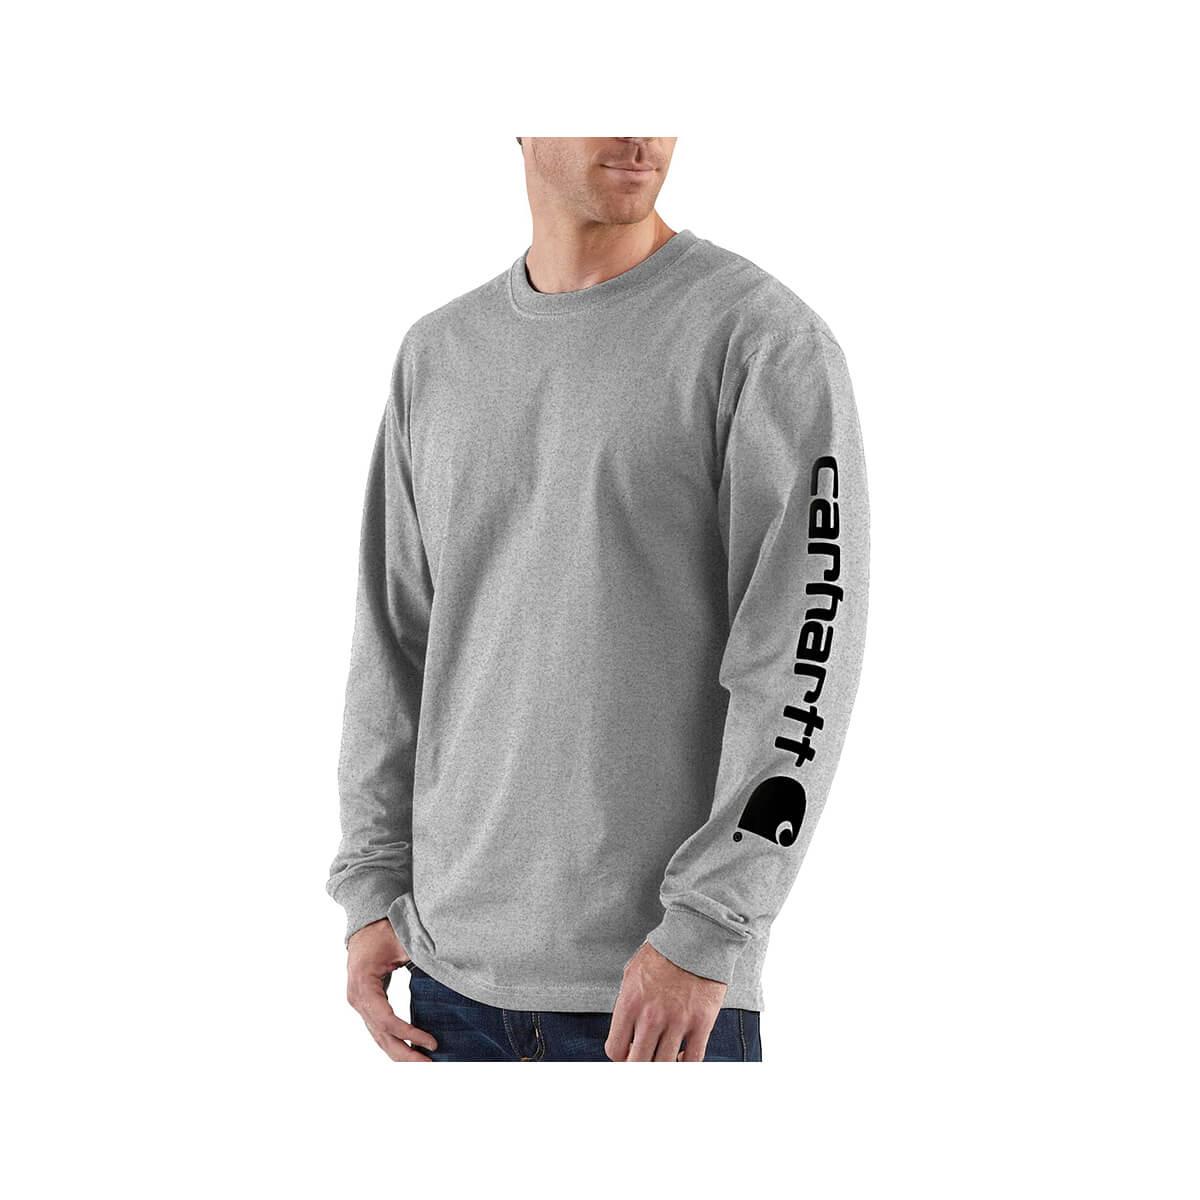  Men's Loose Fit Long Sleeve Logo Graphic Tee